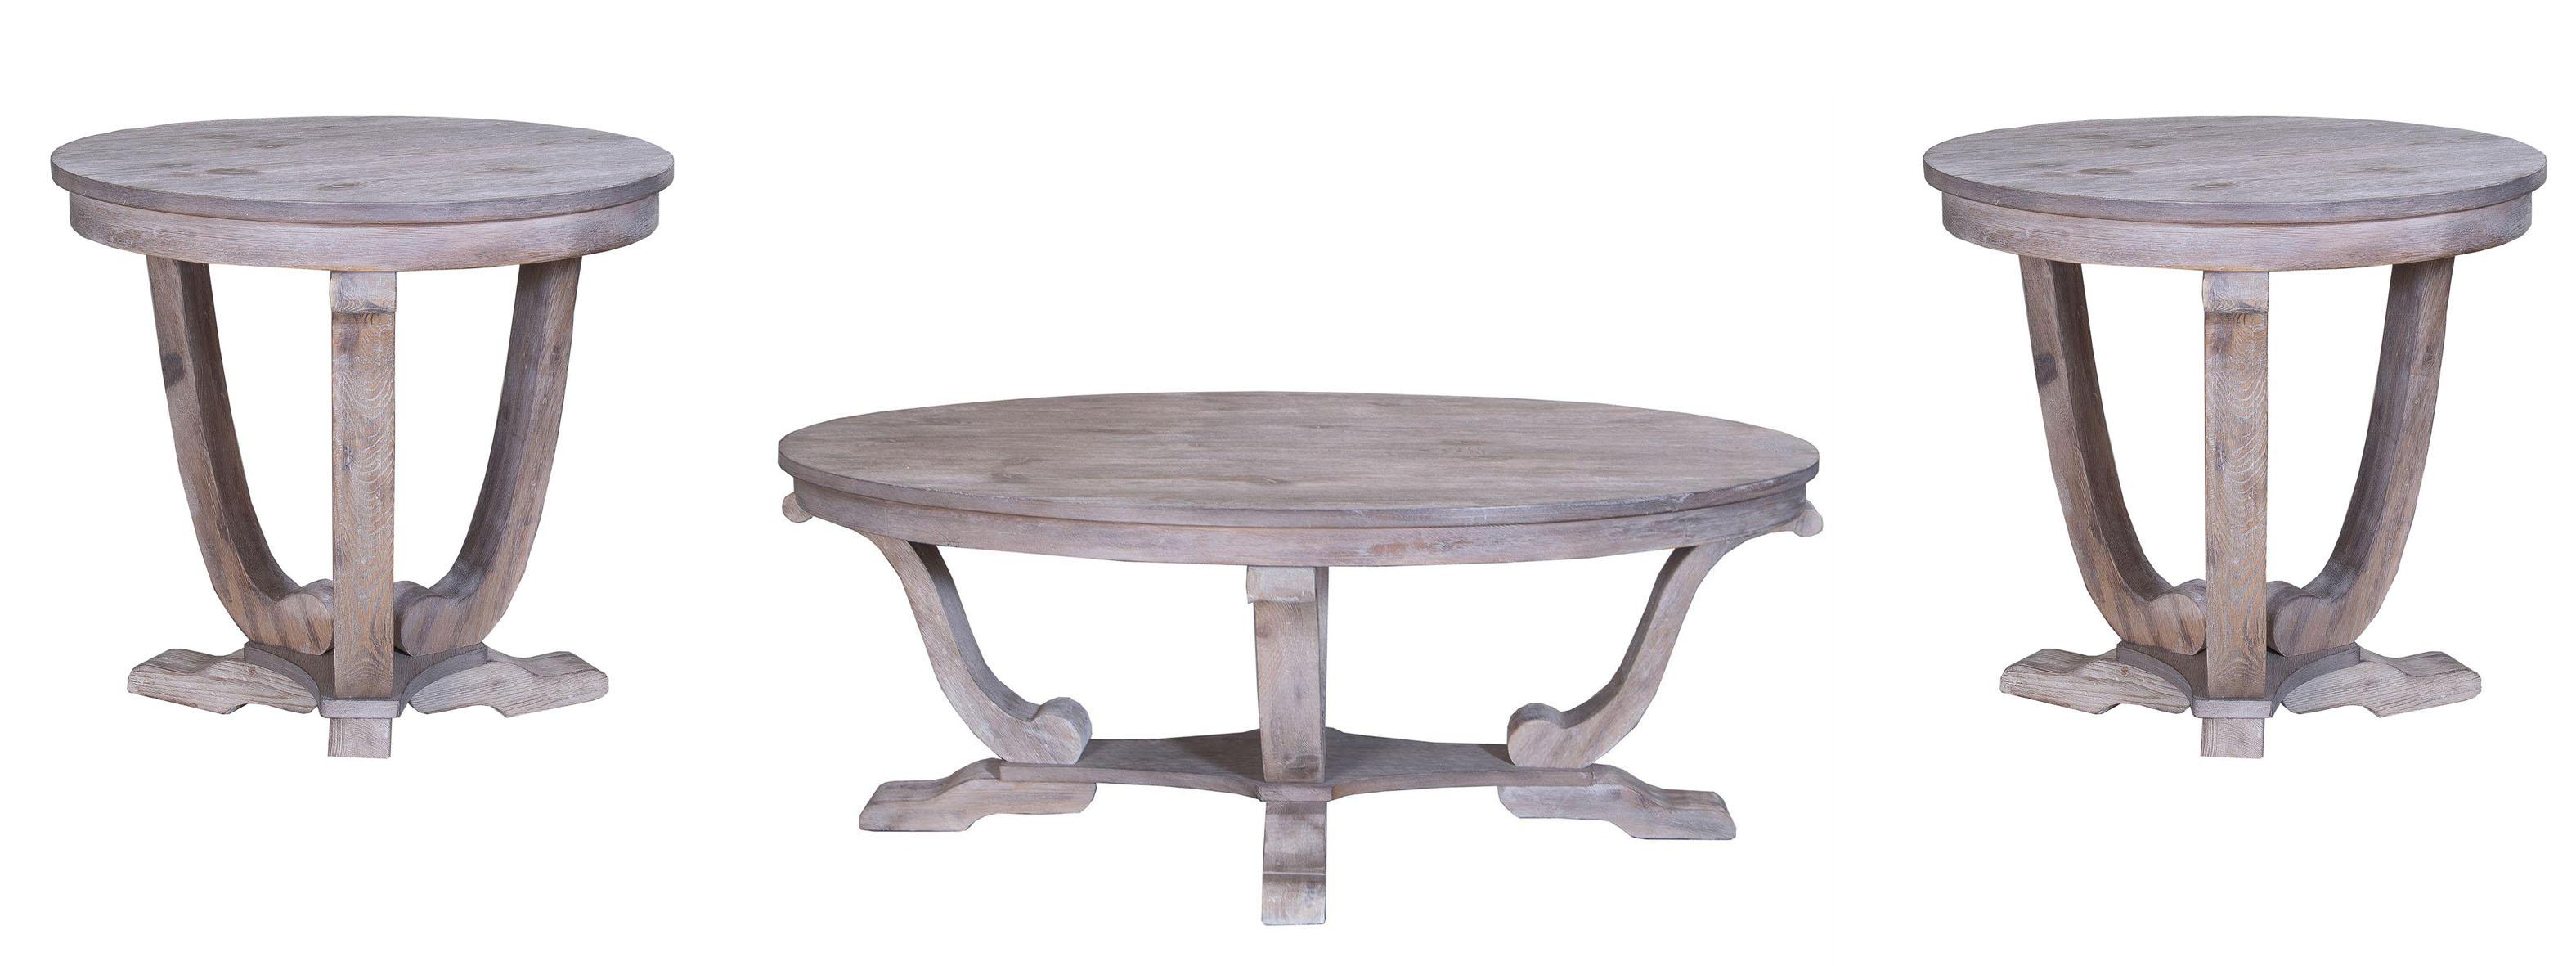 Traditional Coffee Table Set Greystone Mill  (154-OT) Cocktail Table Set 154-OT-3PCS in White Brushed Technique For Rustic Feel